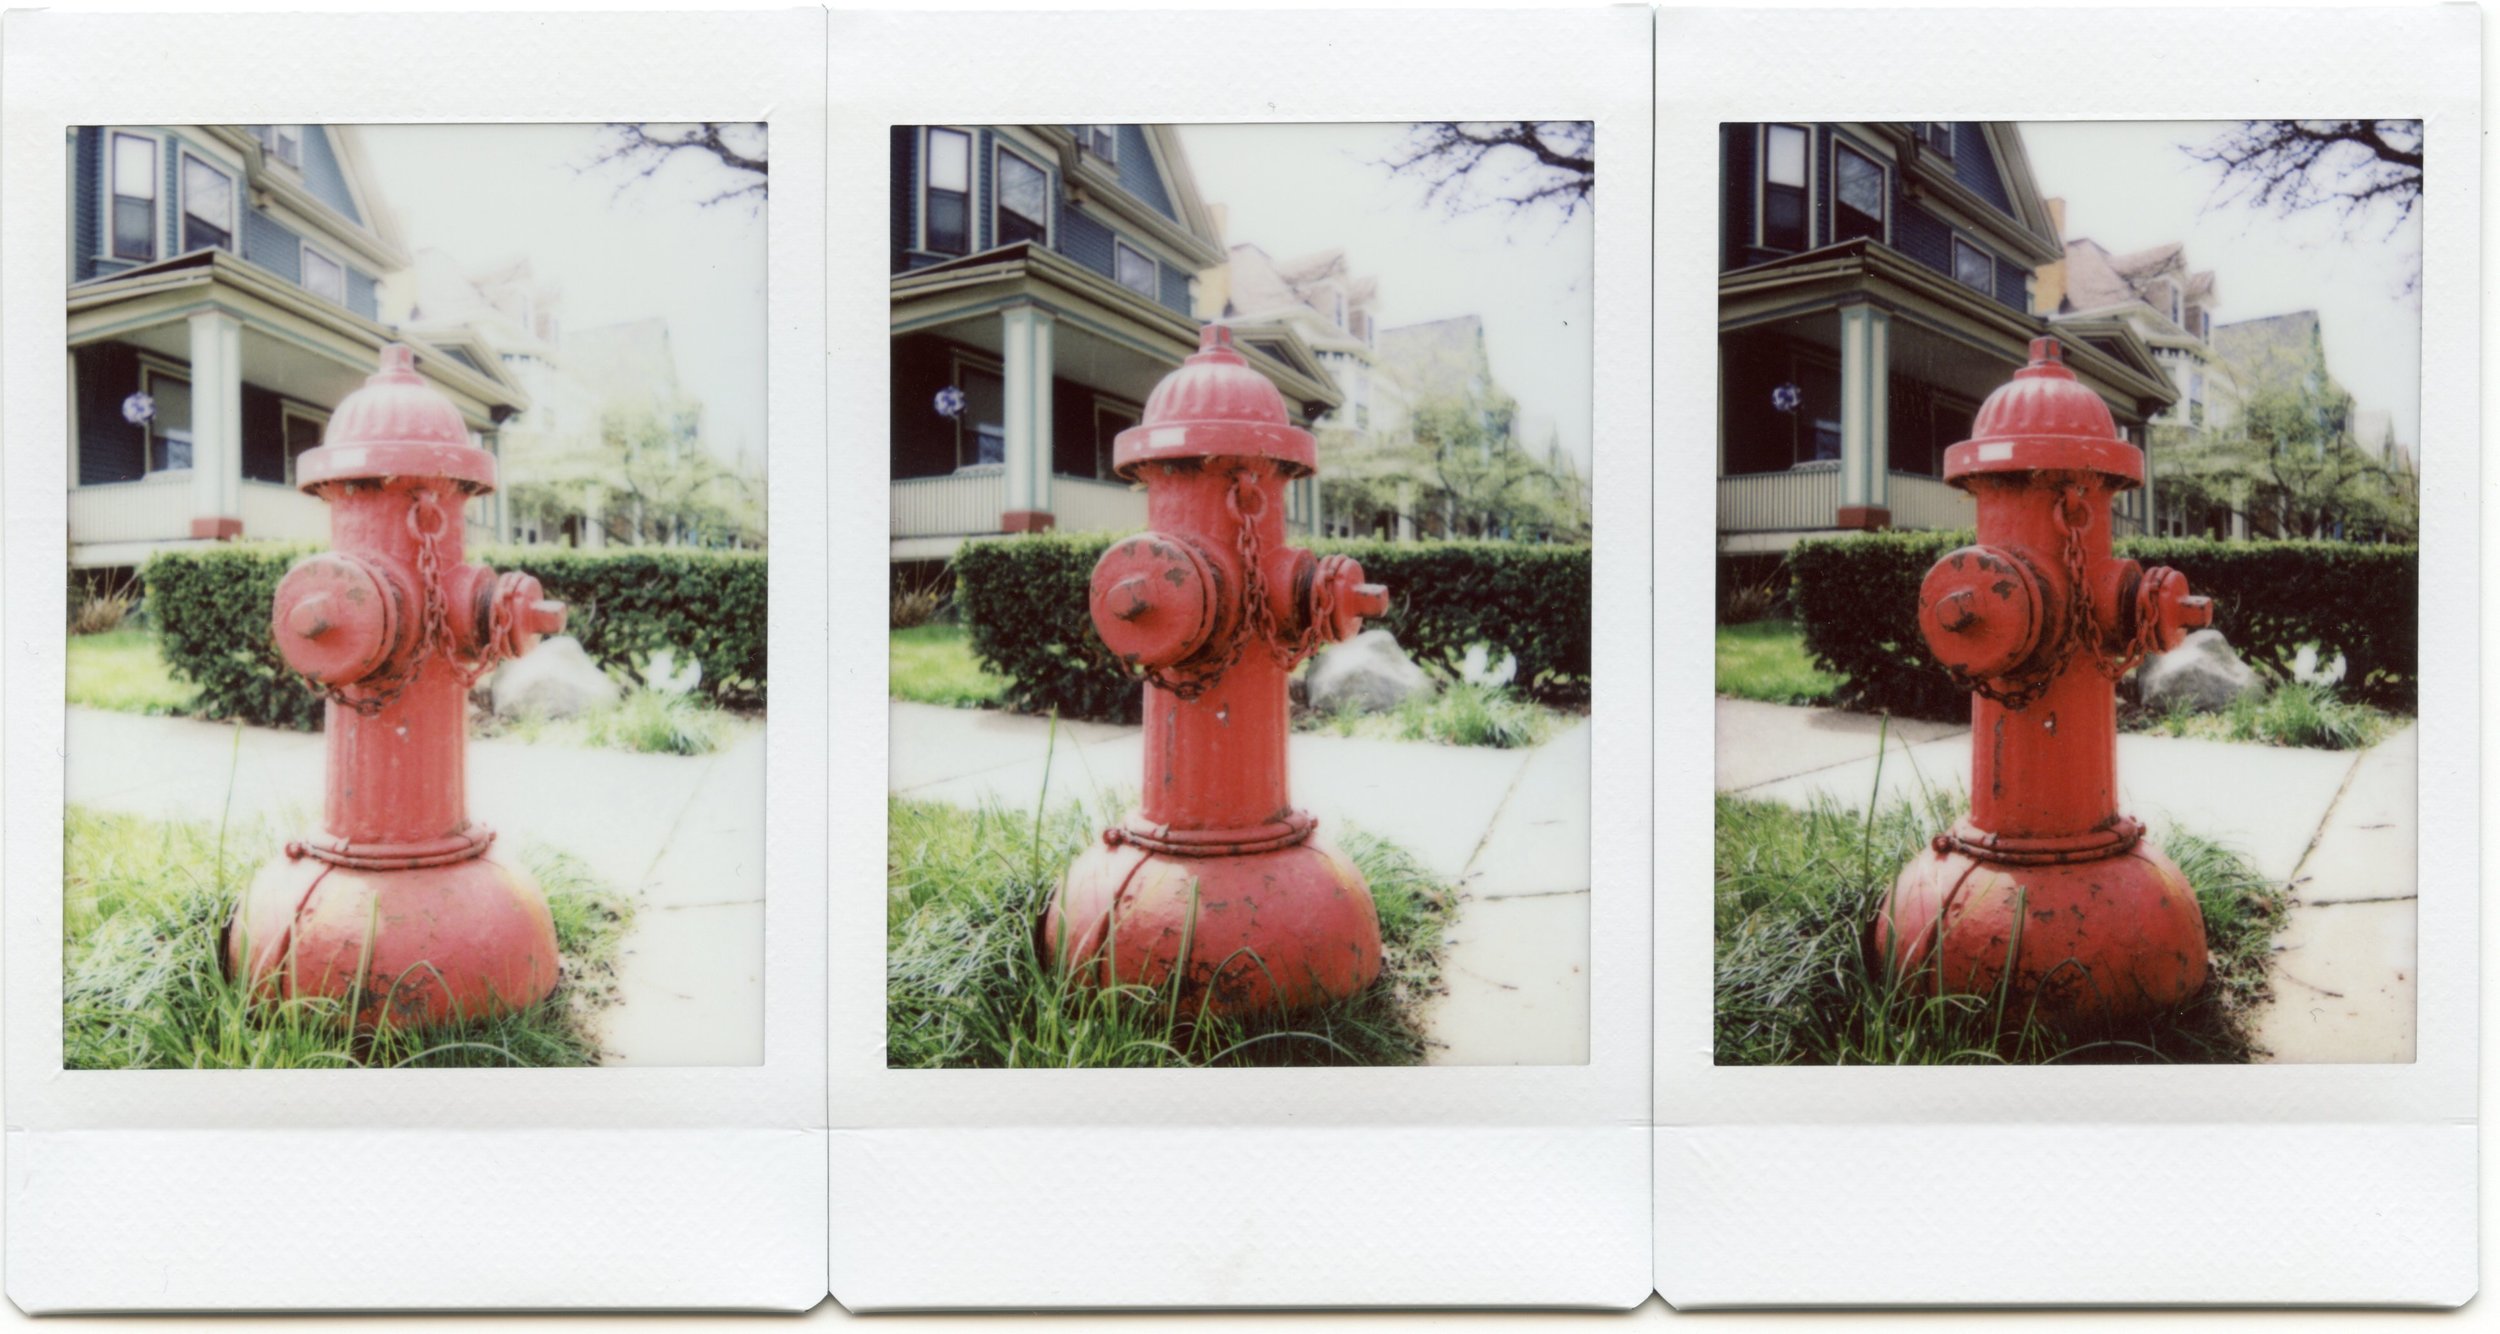 Examples of pictures taken by an Instax 50S mid-day, full sun at 3 ft. from subject with light exposure, normal exposure and dark exposure.